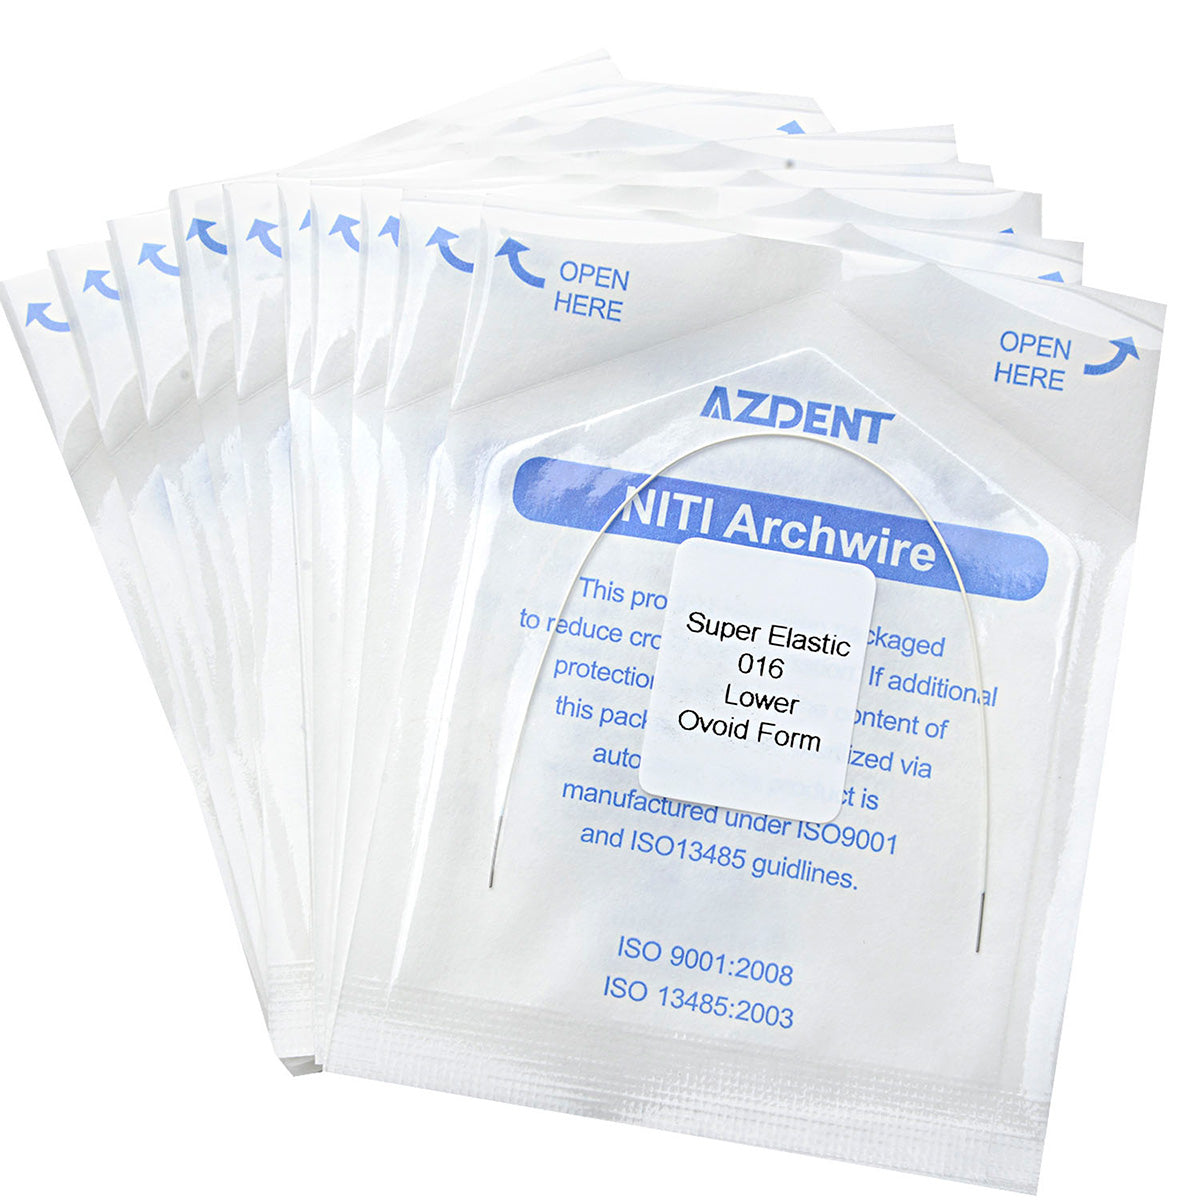 10 Packs AZDENT Archwire NiTi Super Elastic Colored Coated Ovoid Round 0.016 Lower 1pcs/Pack - azdentall.com